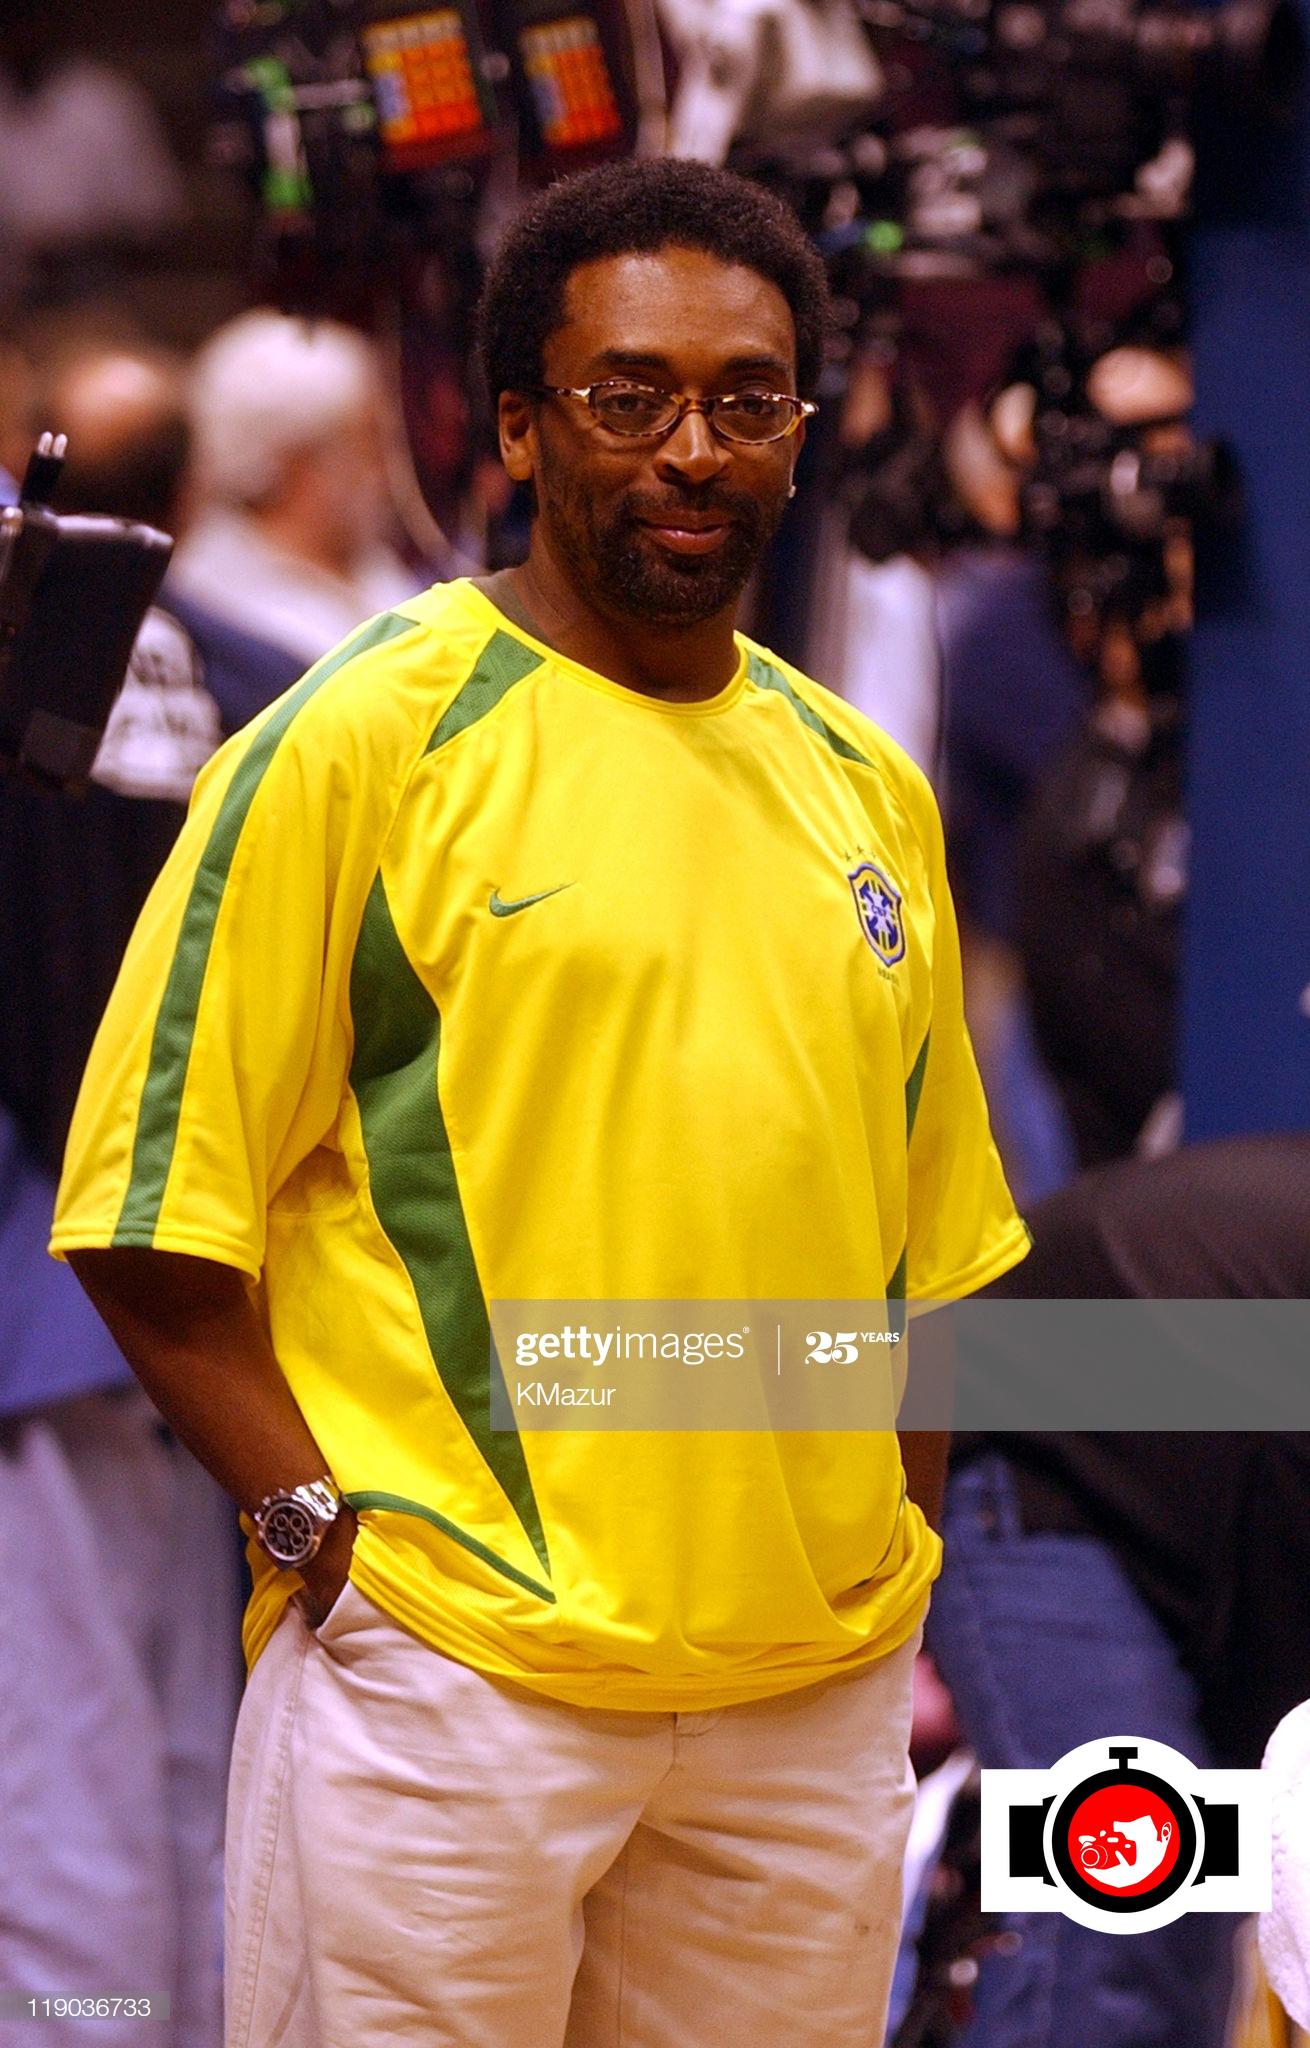 film director Spike Lee spotted wearing a Rolex 116520